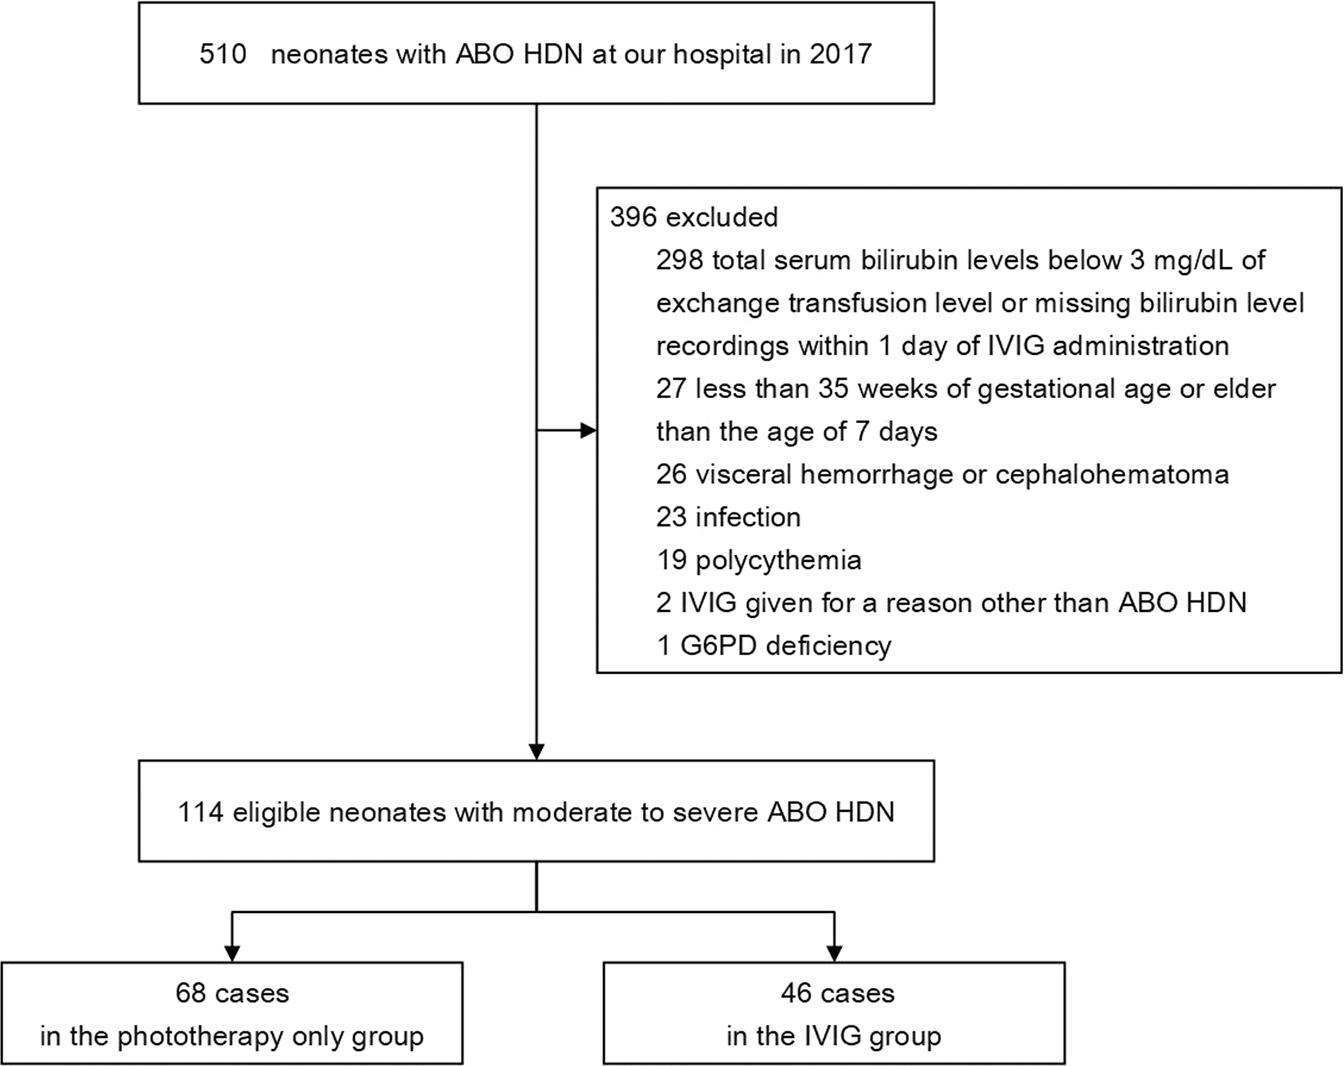 Intravenous immunoglobulin G in the treatment of ABO hemolytic disease of  the newborn during the early neonatal period at a tertiary academic  hospital: a retrospective study | Journal of Perinatology